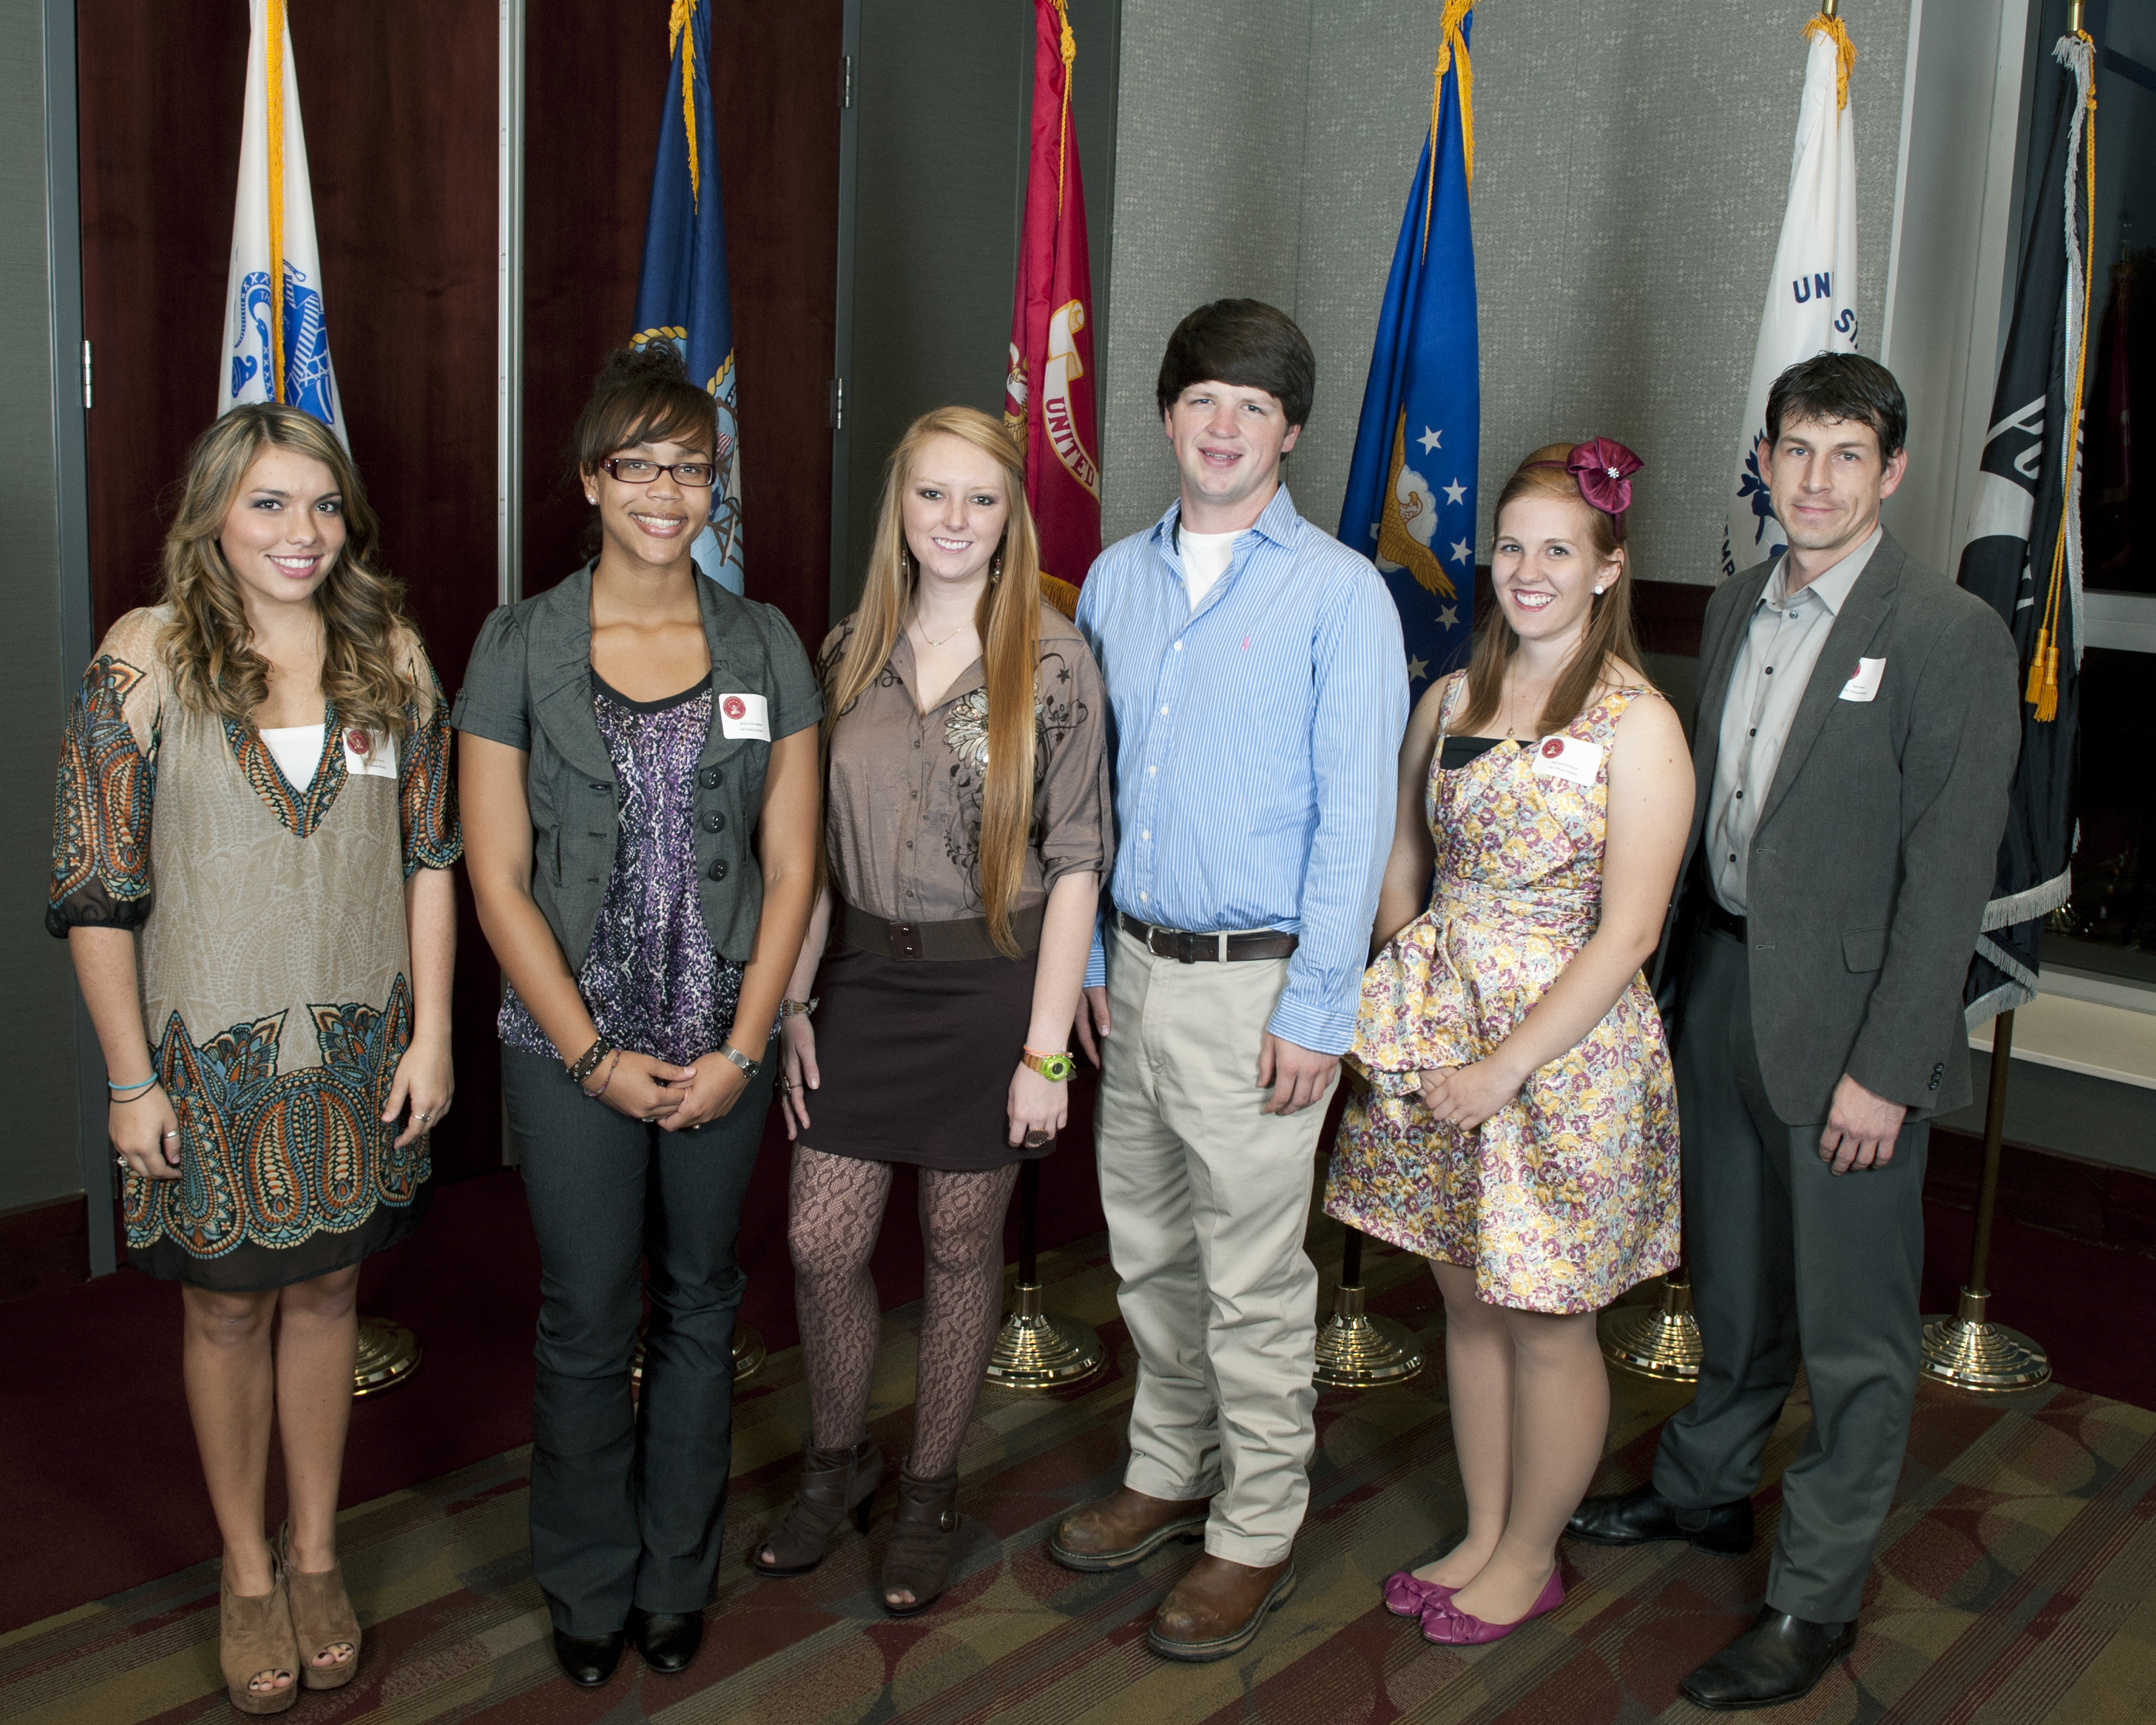 Returning Tillman Military Scholars are, left to right, Catherine Turner, Janice Cunningham, Samantha Hill, and Markus Edwards; and this year's new scholars are Patricia Pohlhaus and Ryan Bear. Not pictured, James M. Bryant.